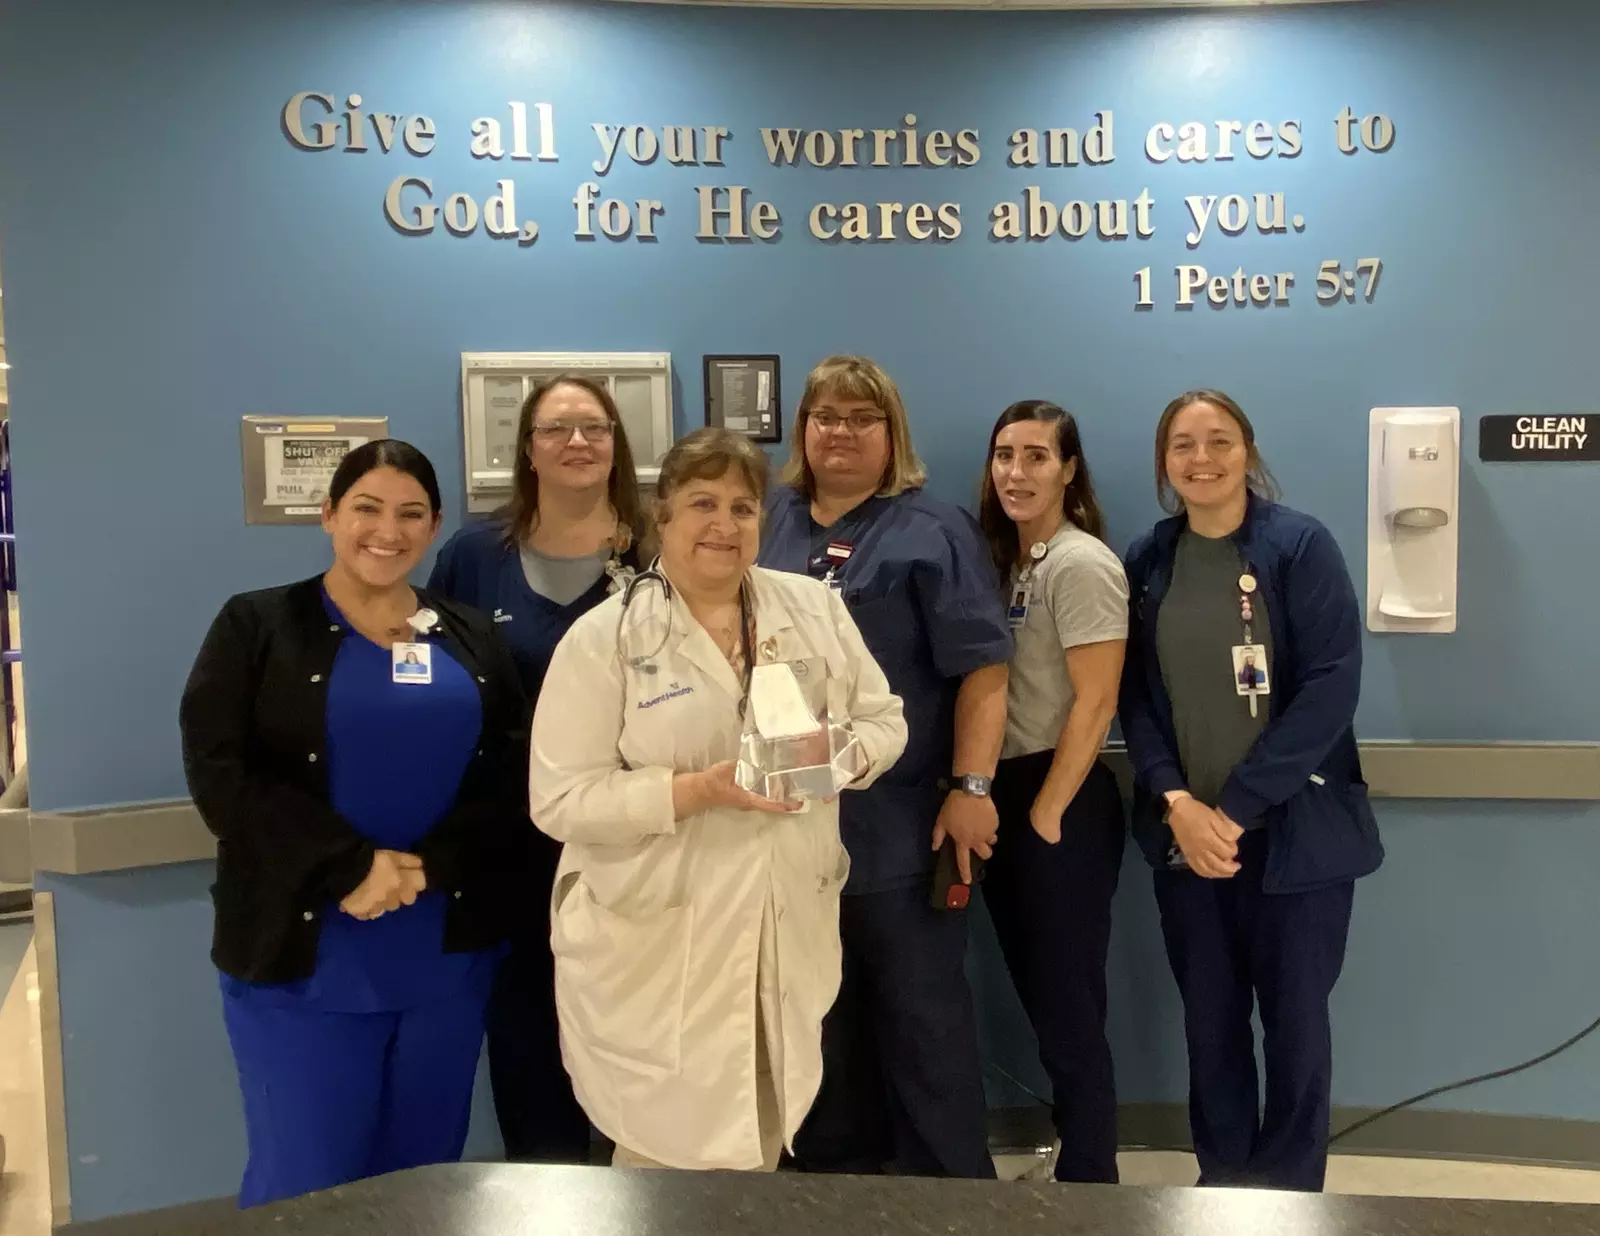 The inpatient Med/Surg team celebrates the 100 Top Hospital award. Left to right: Sheena Battles, NP, Robin Green, RN, Lisa Counsell, MD, Kathy Kinsey, RN, Ashley Bohannon, RN and April Gallman, RN.